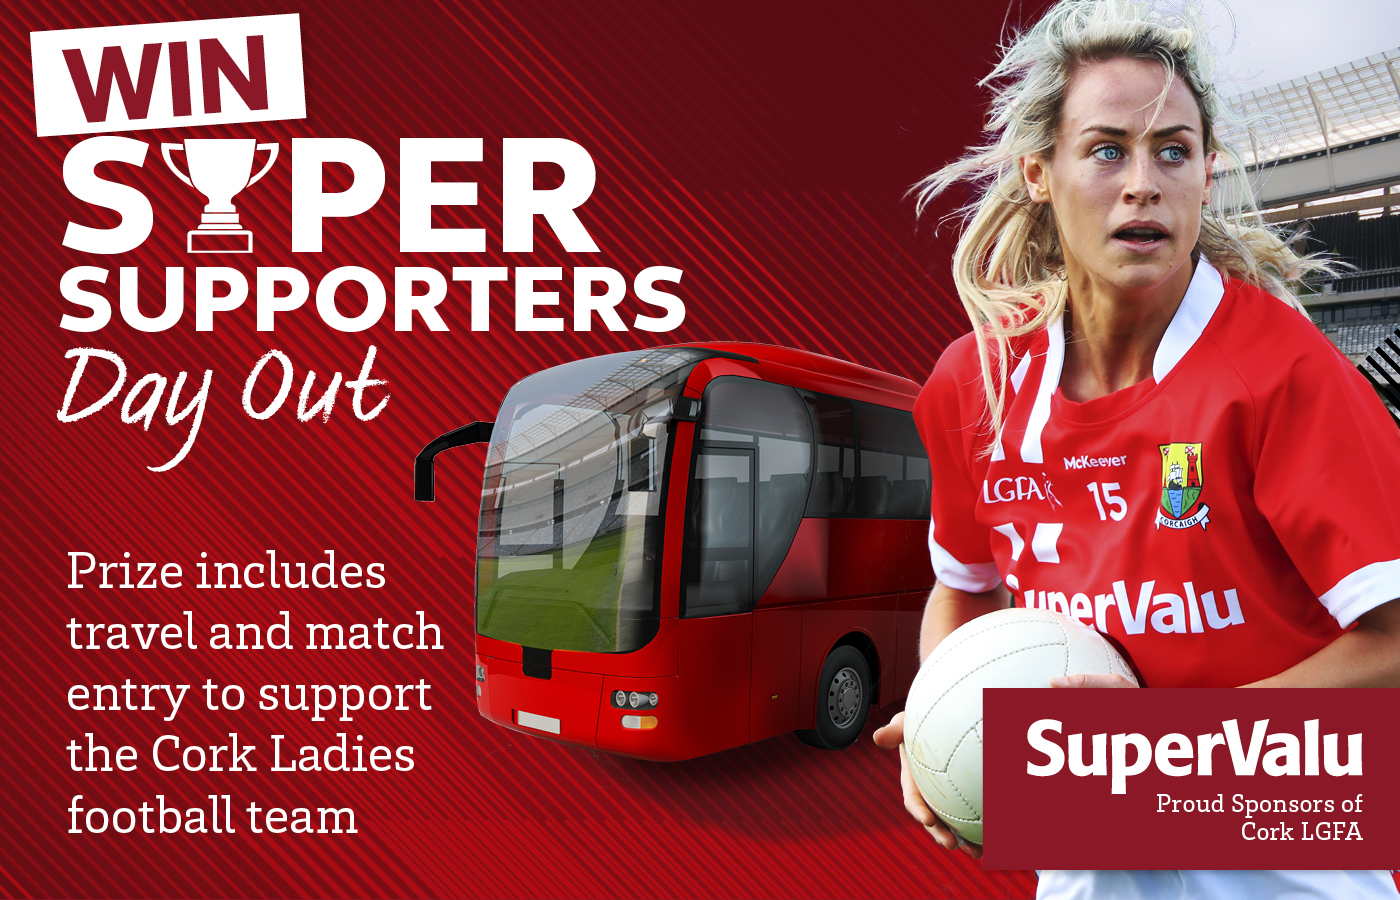 Win a Super Supporters Day Out to cheer on the Cork Ladies Footballers